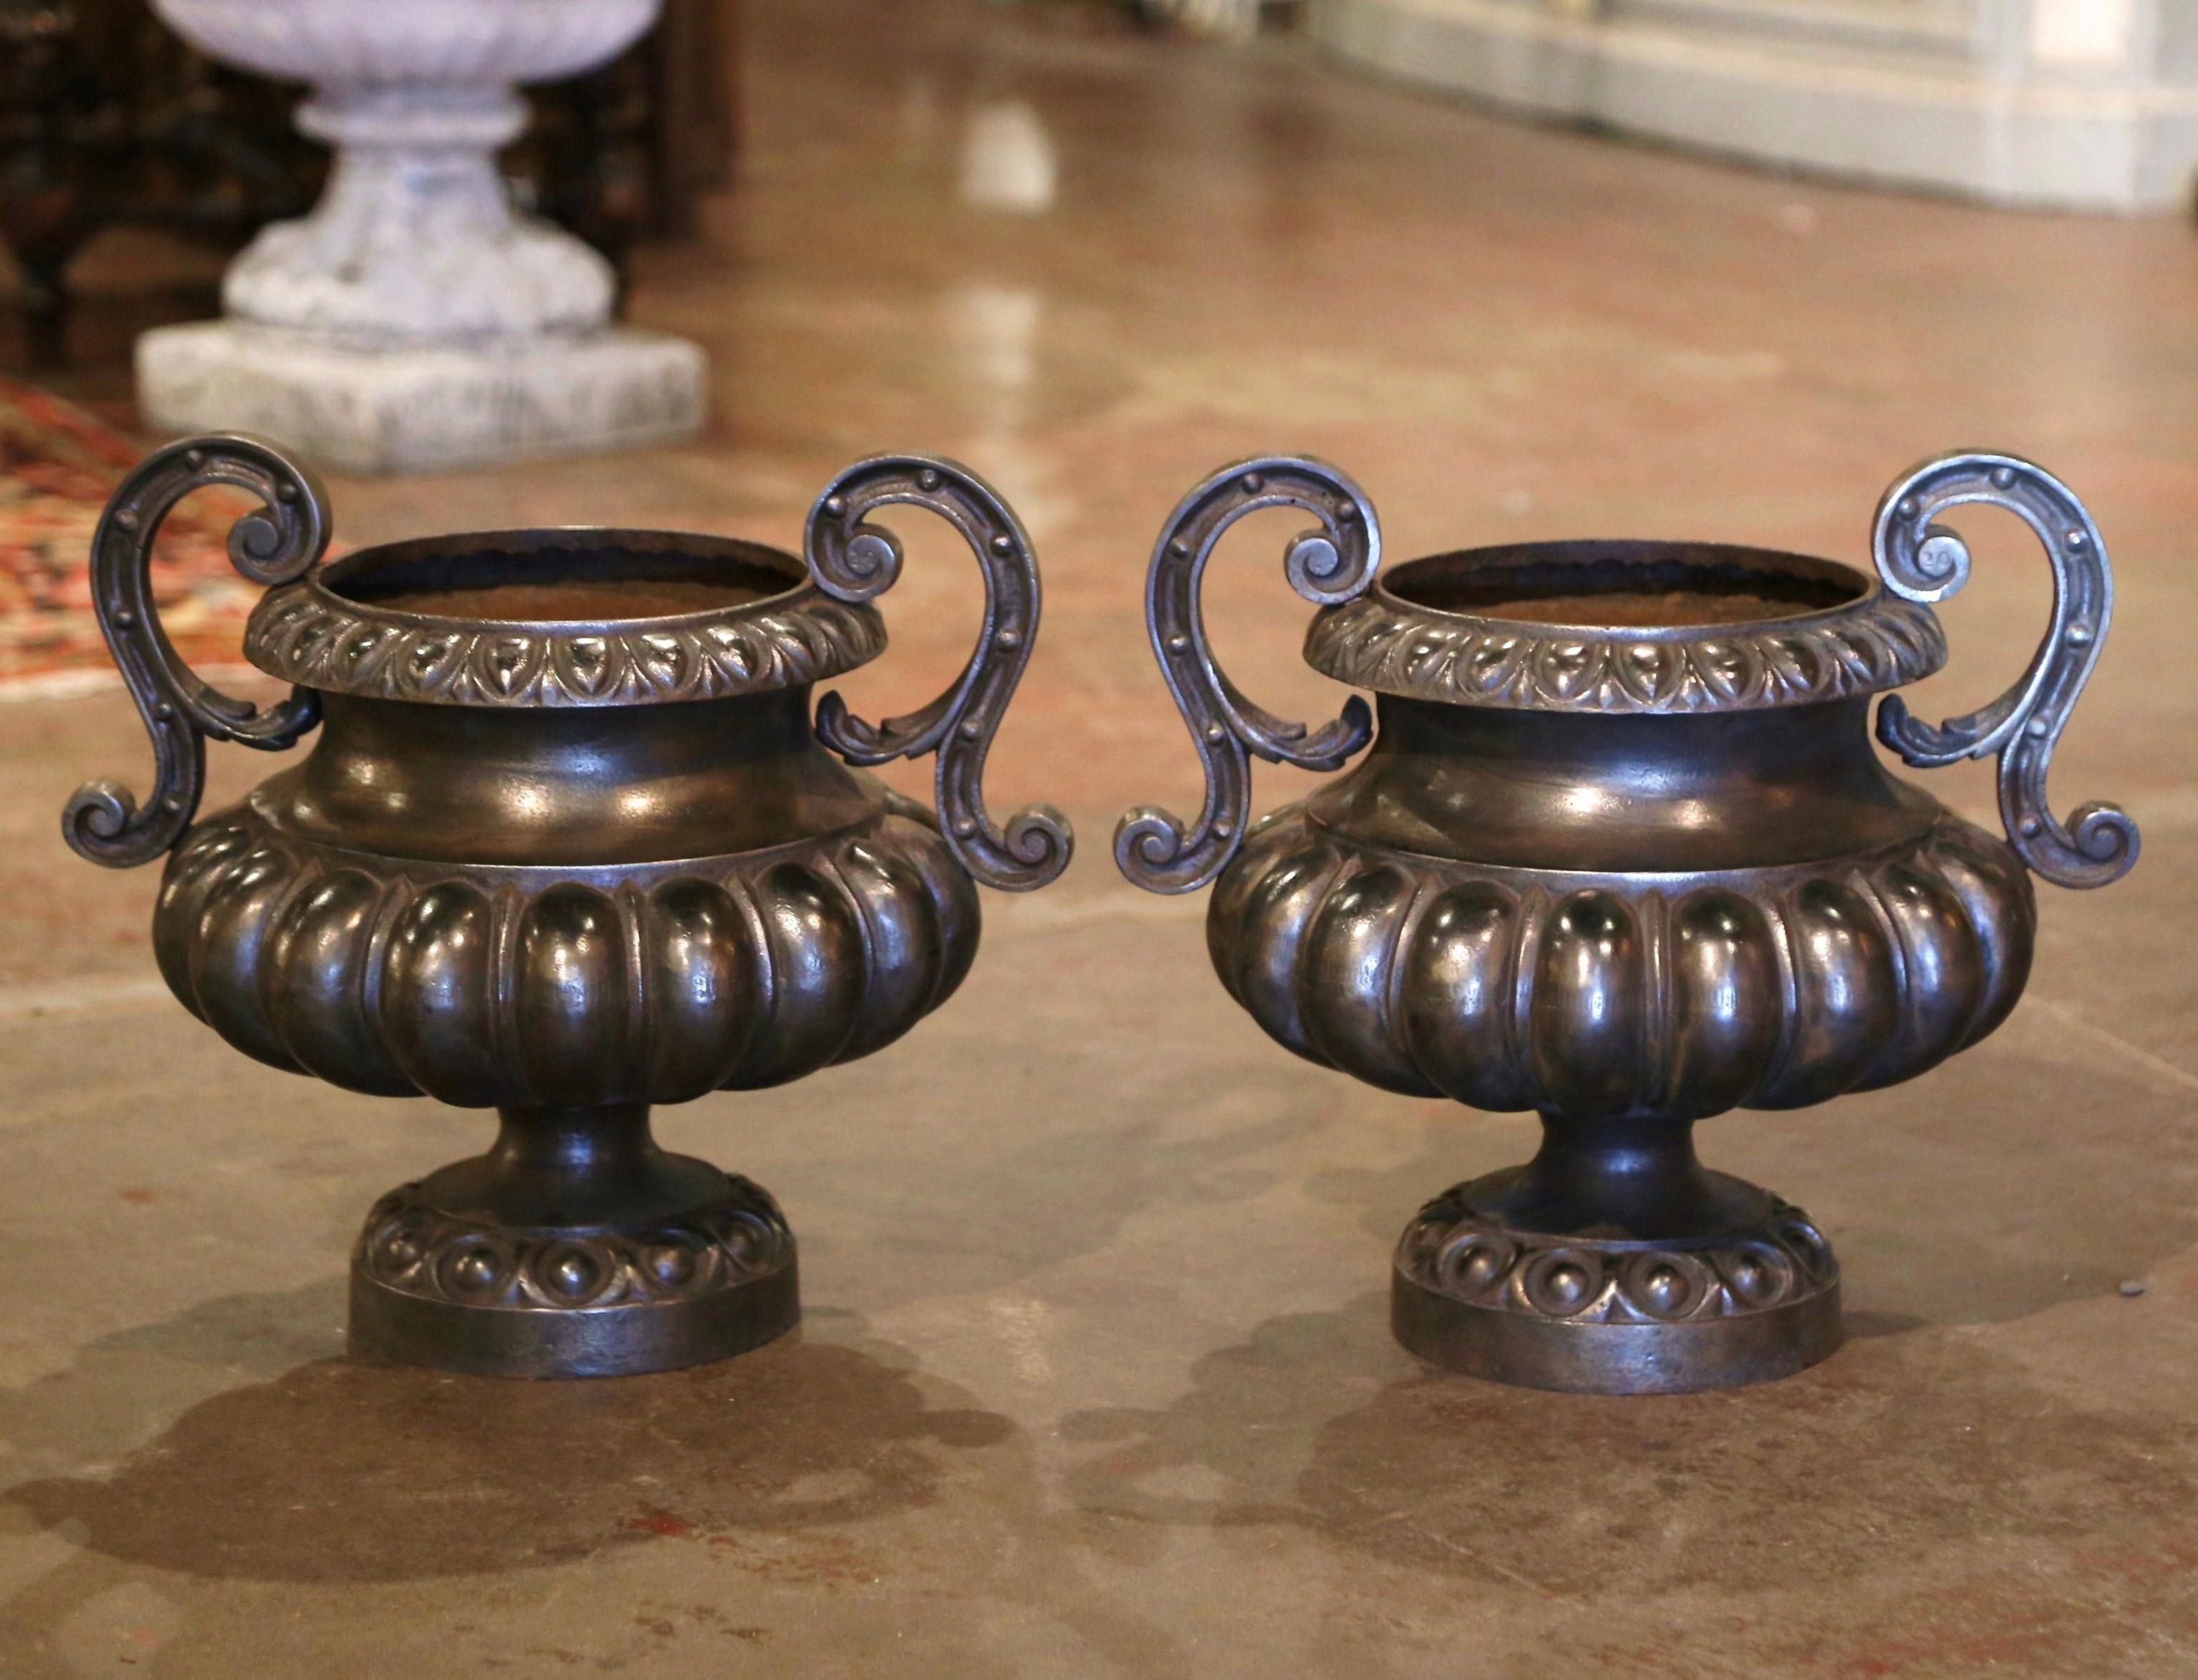 Pair of 19th Century French Neoclassical Polished Iron Garden Urn Planters For Sale 2